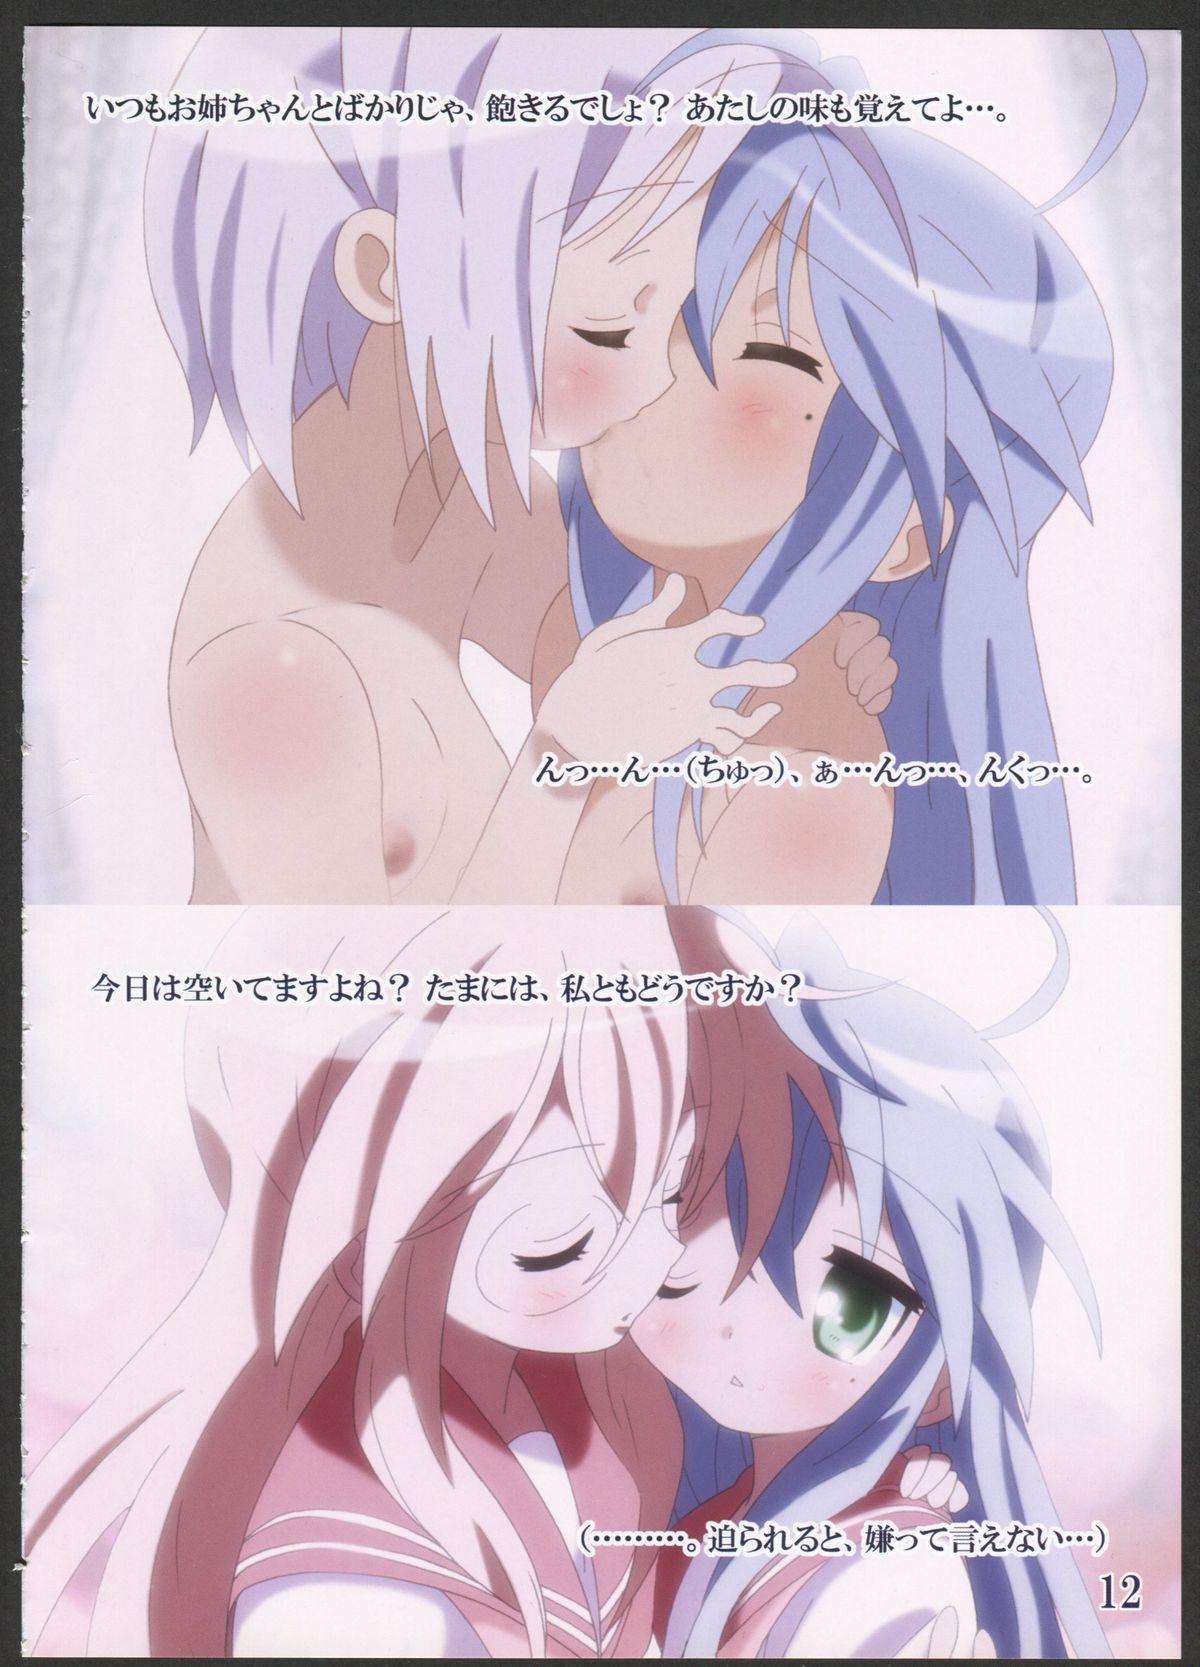 18yo YOU LISTER2 - Lucky star Blows - Page 12